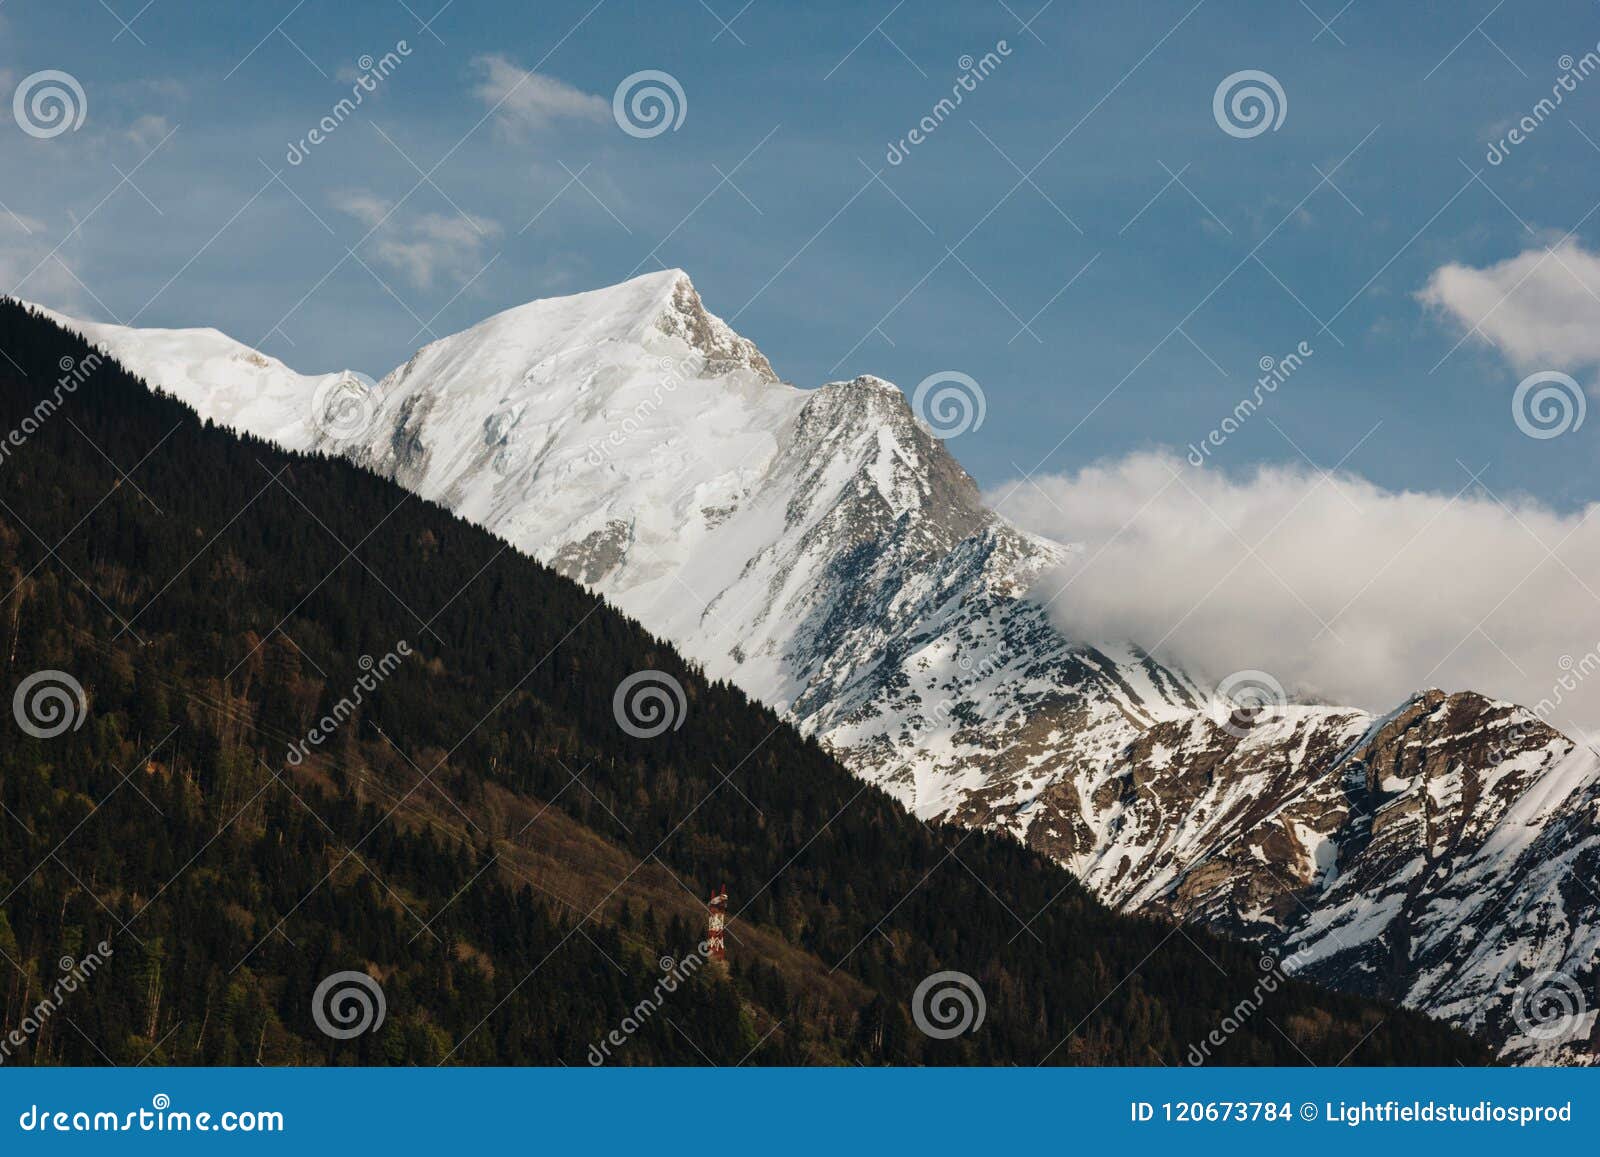 Majestic Snow Capped Peaks And Green Vegetation In Beautiful Mountains